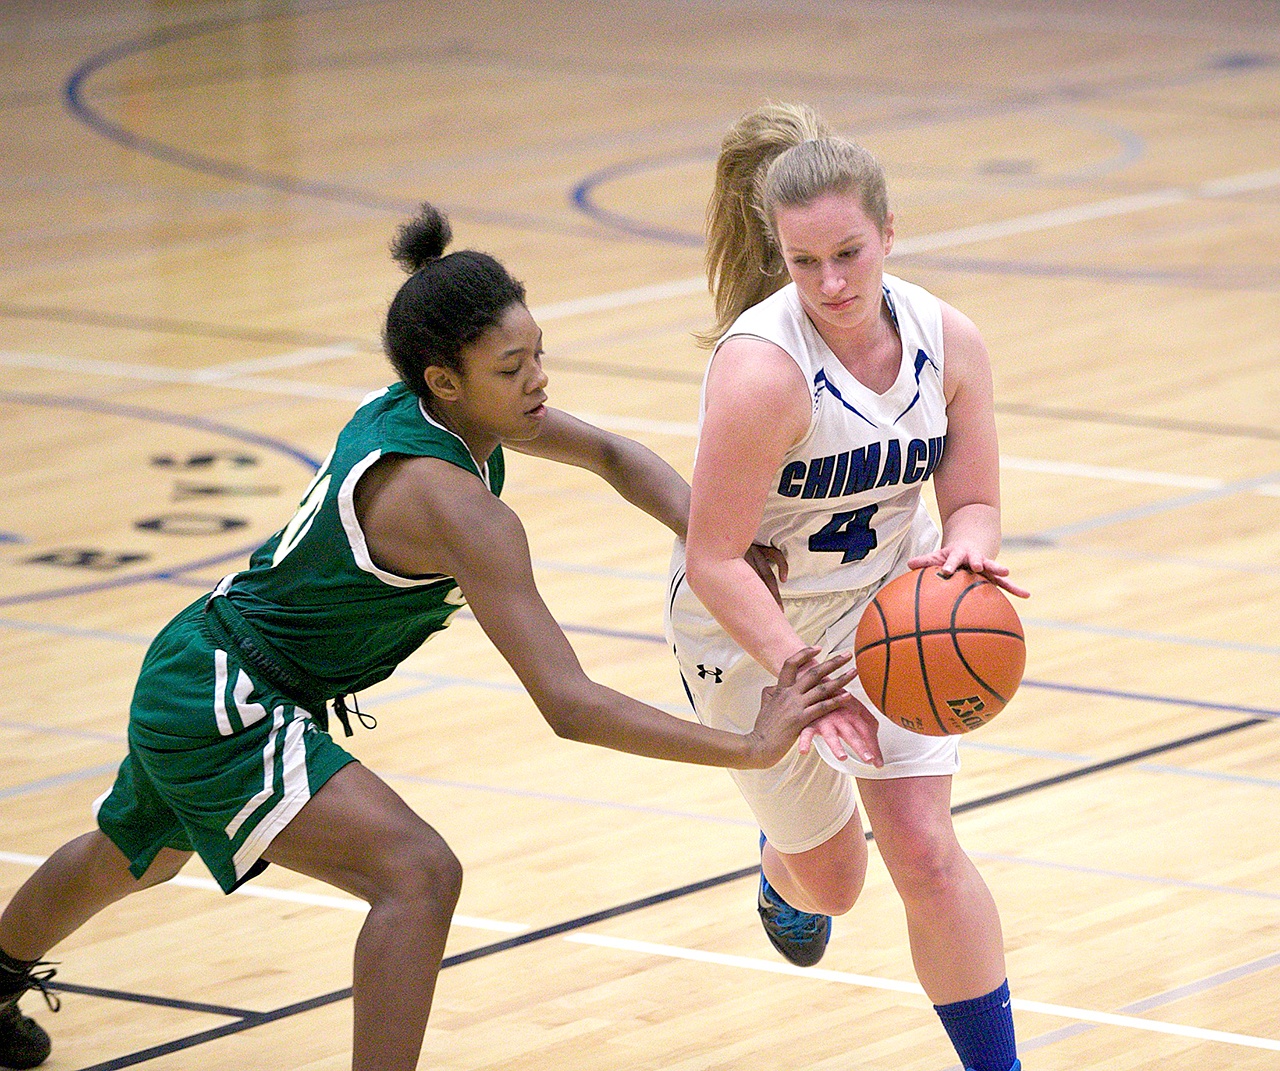 Steve Mullensky/for Peninsula Daily News Vashon’s Kristi Walker tries to dislodge the ball away from Chimacum’s Mechelle Nisbet during a West Central District 3 pigtail playoff game in Chimacum on Friday.